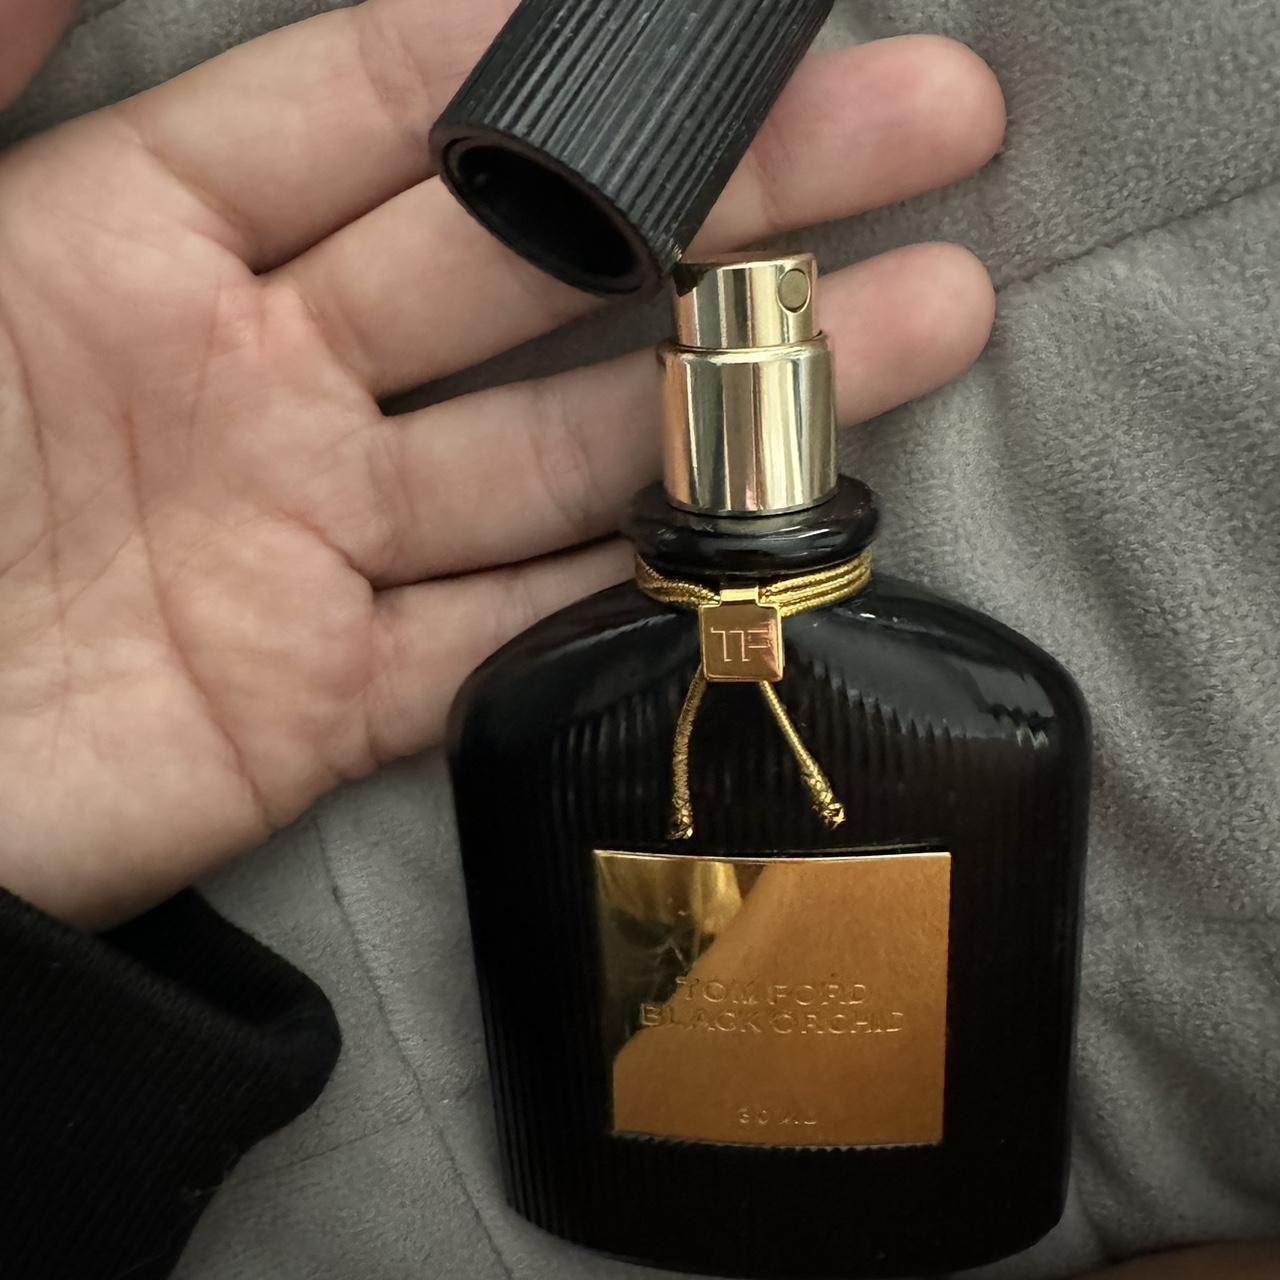 Tom ford black orchid perfume - 30ml Selling for £75... - Depop